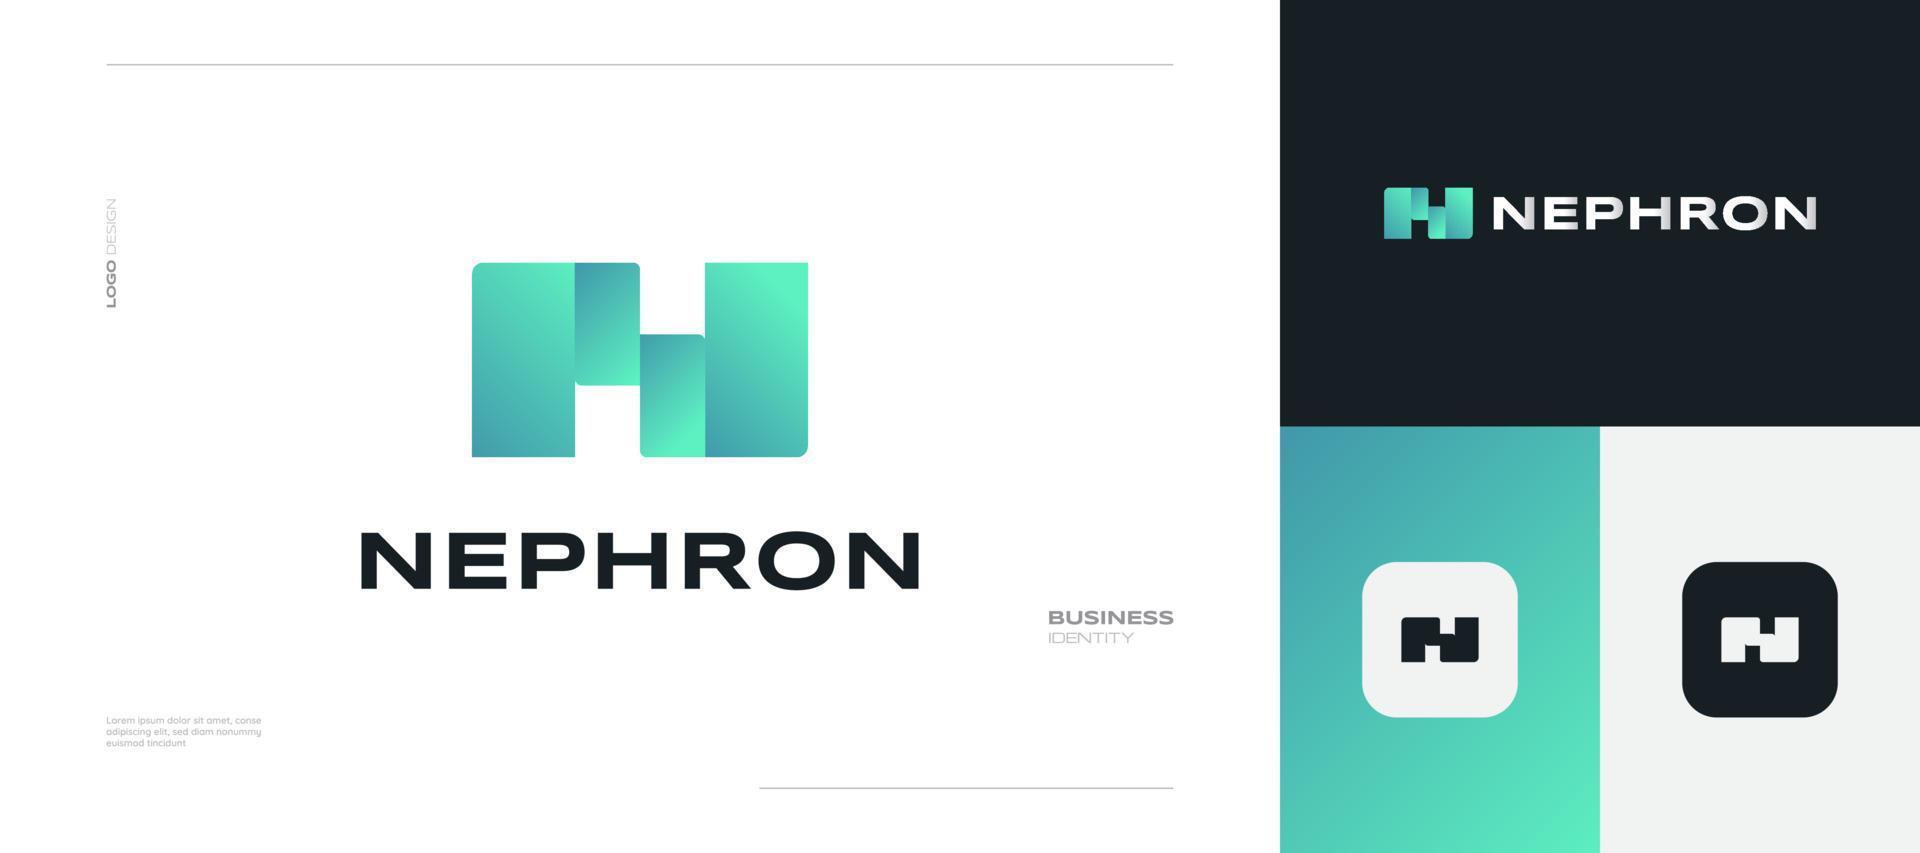 Abstract and Modern Letter N Logo Design with Minimalist Concept. Can be used for Business and Technology Brand Identity vector